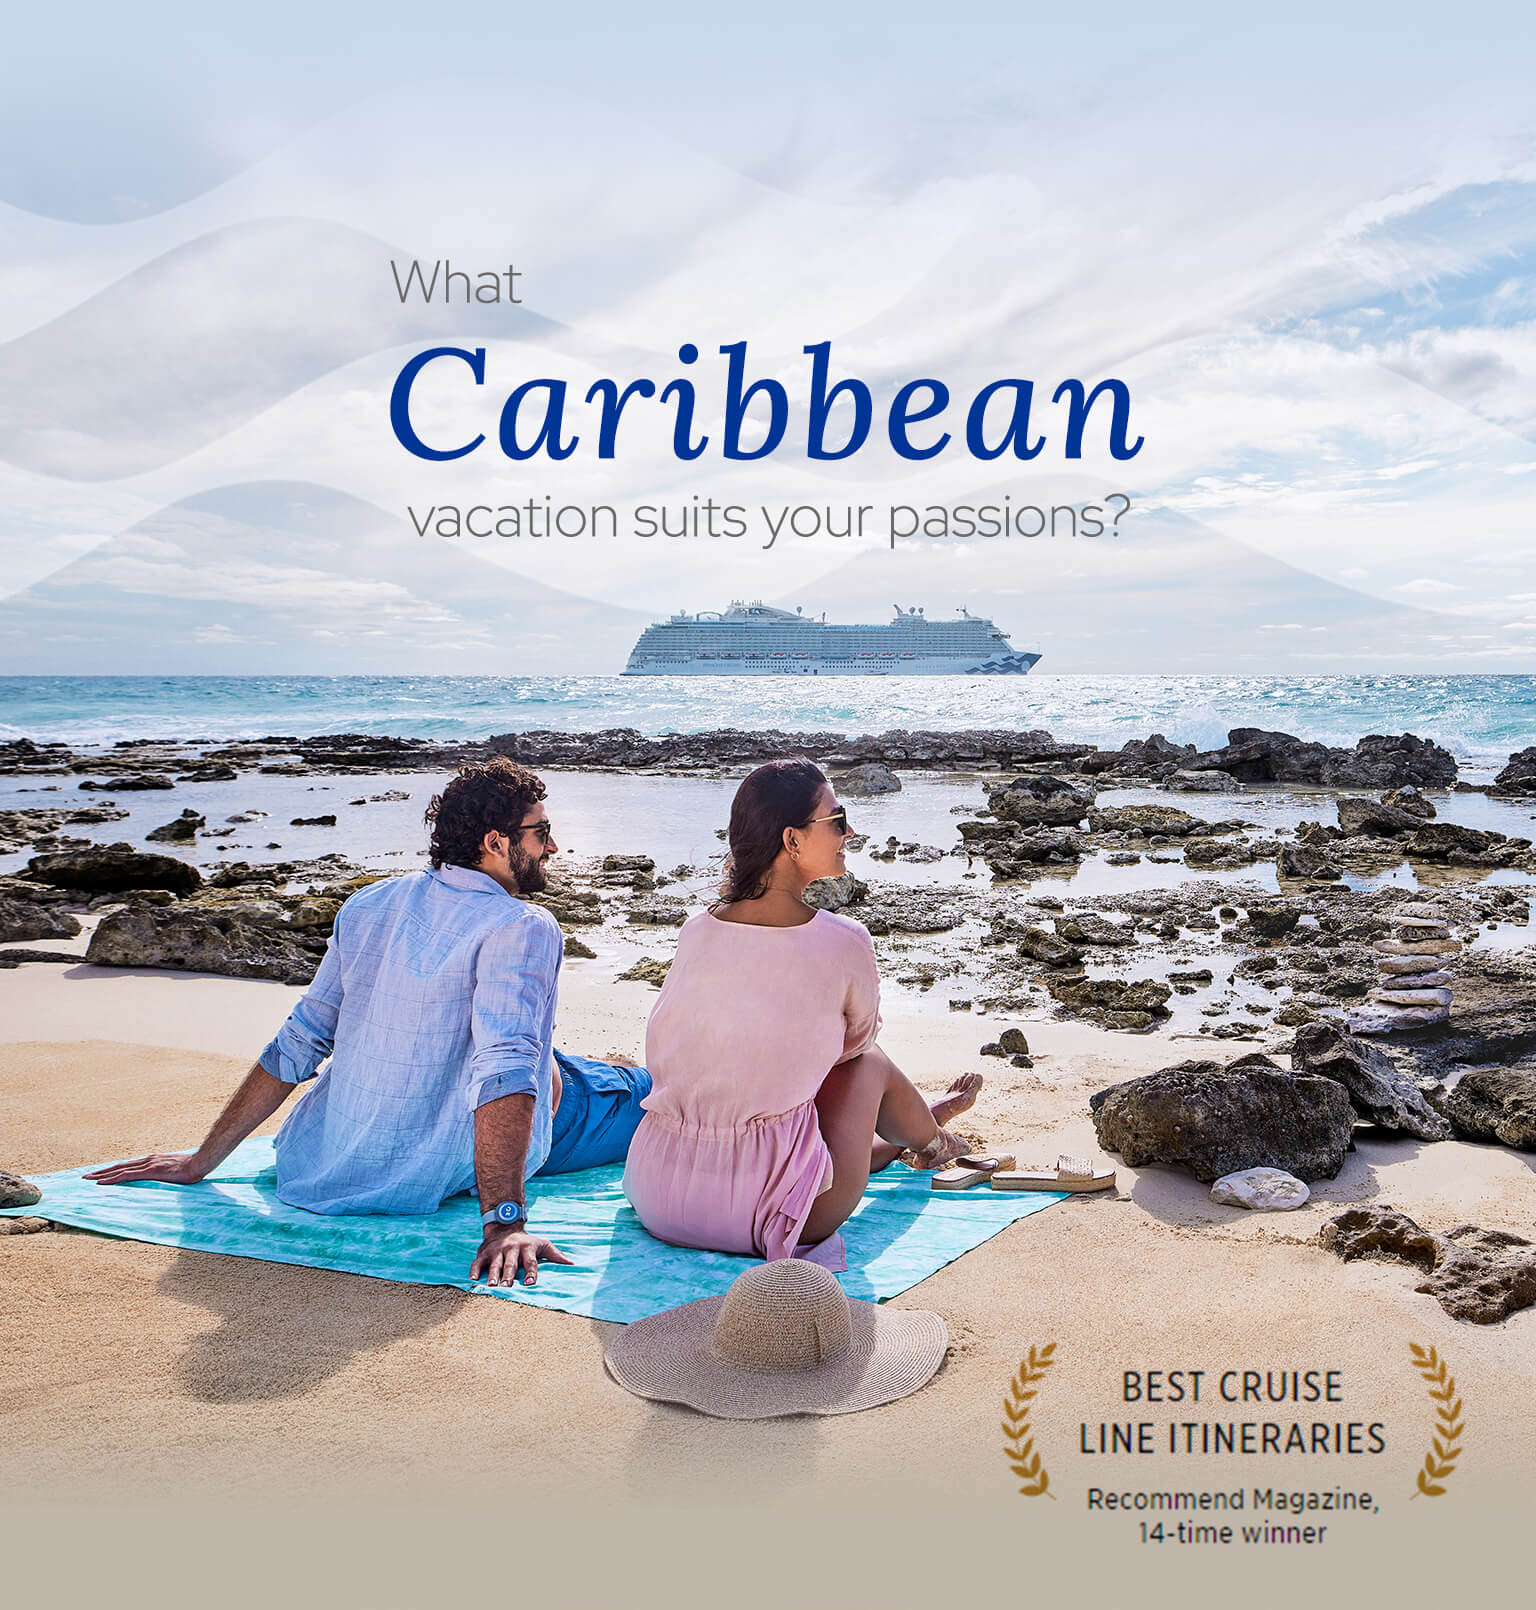 Couple at beach. What Caribbean vacations suits your passions? Best cruise line itineraries. Recommend Magazine, 14-time winner logo.